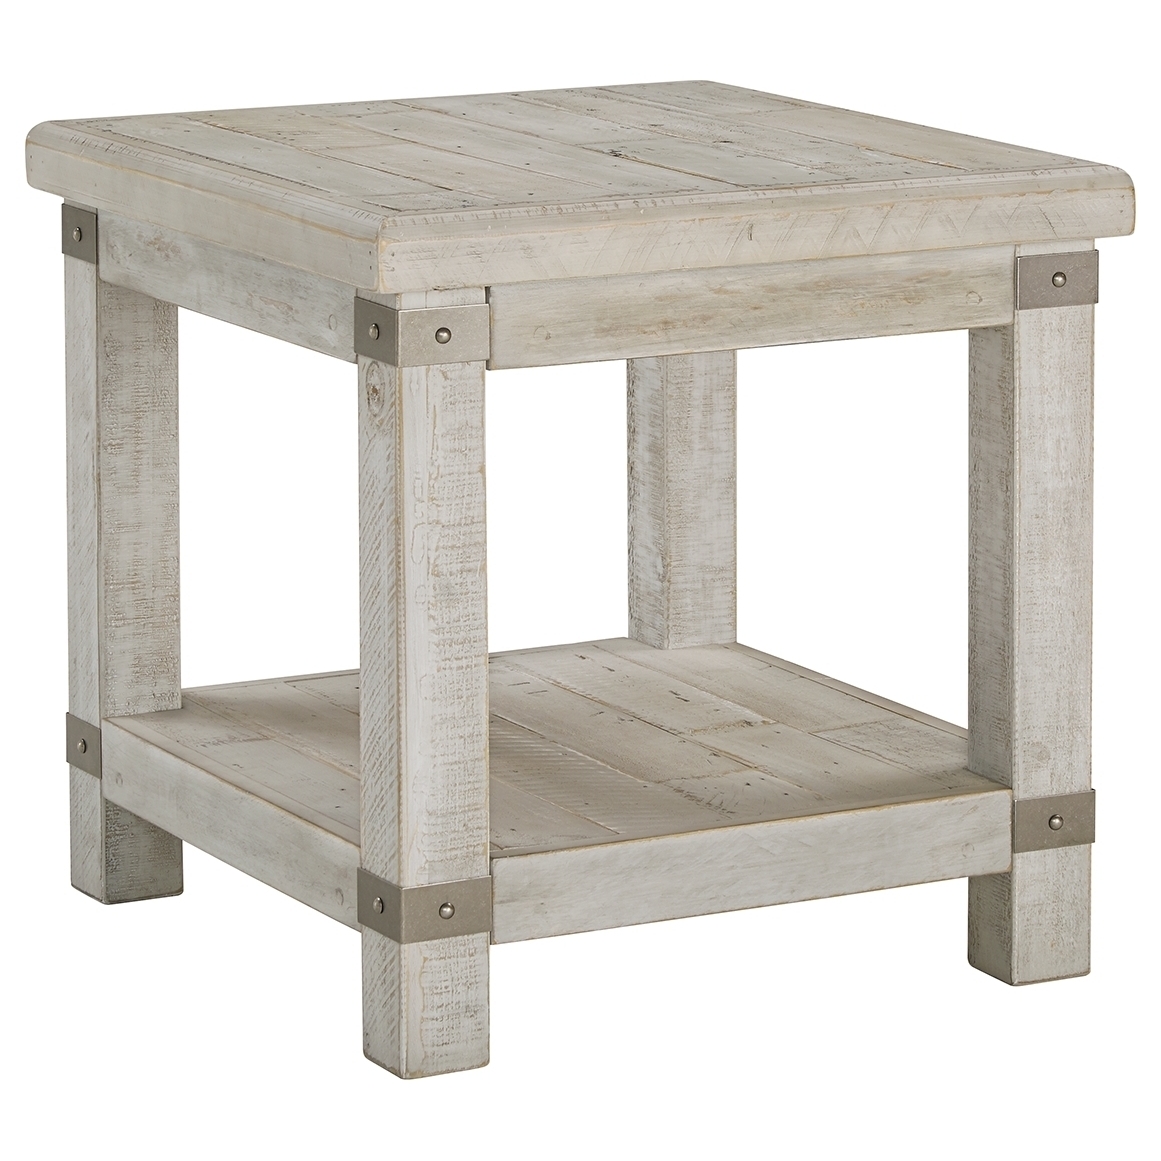 Cottage Style Wooden End Table With Corner Metal Accent, White- Saltoro Sherpi